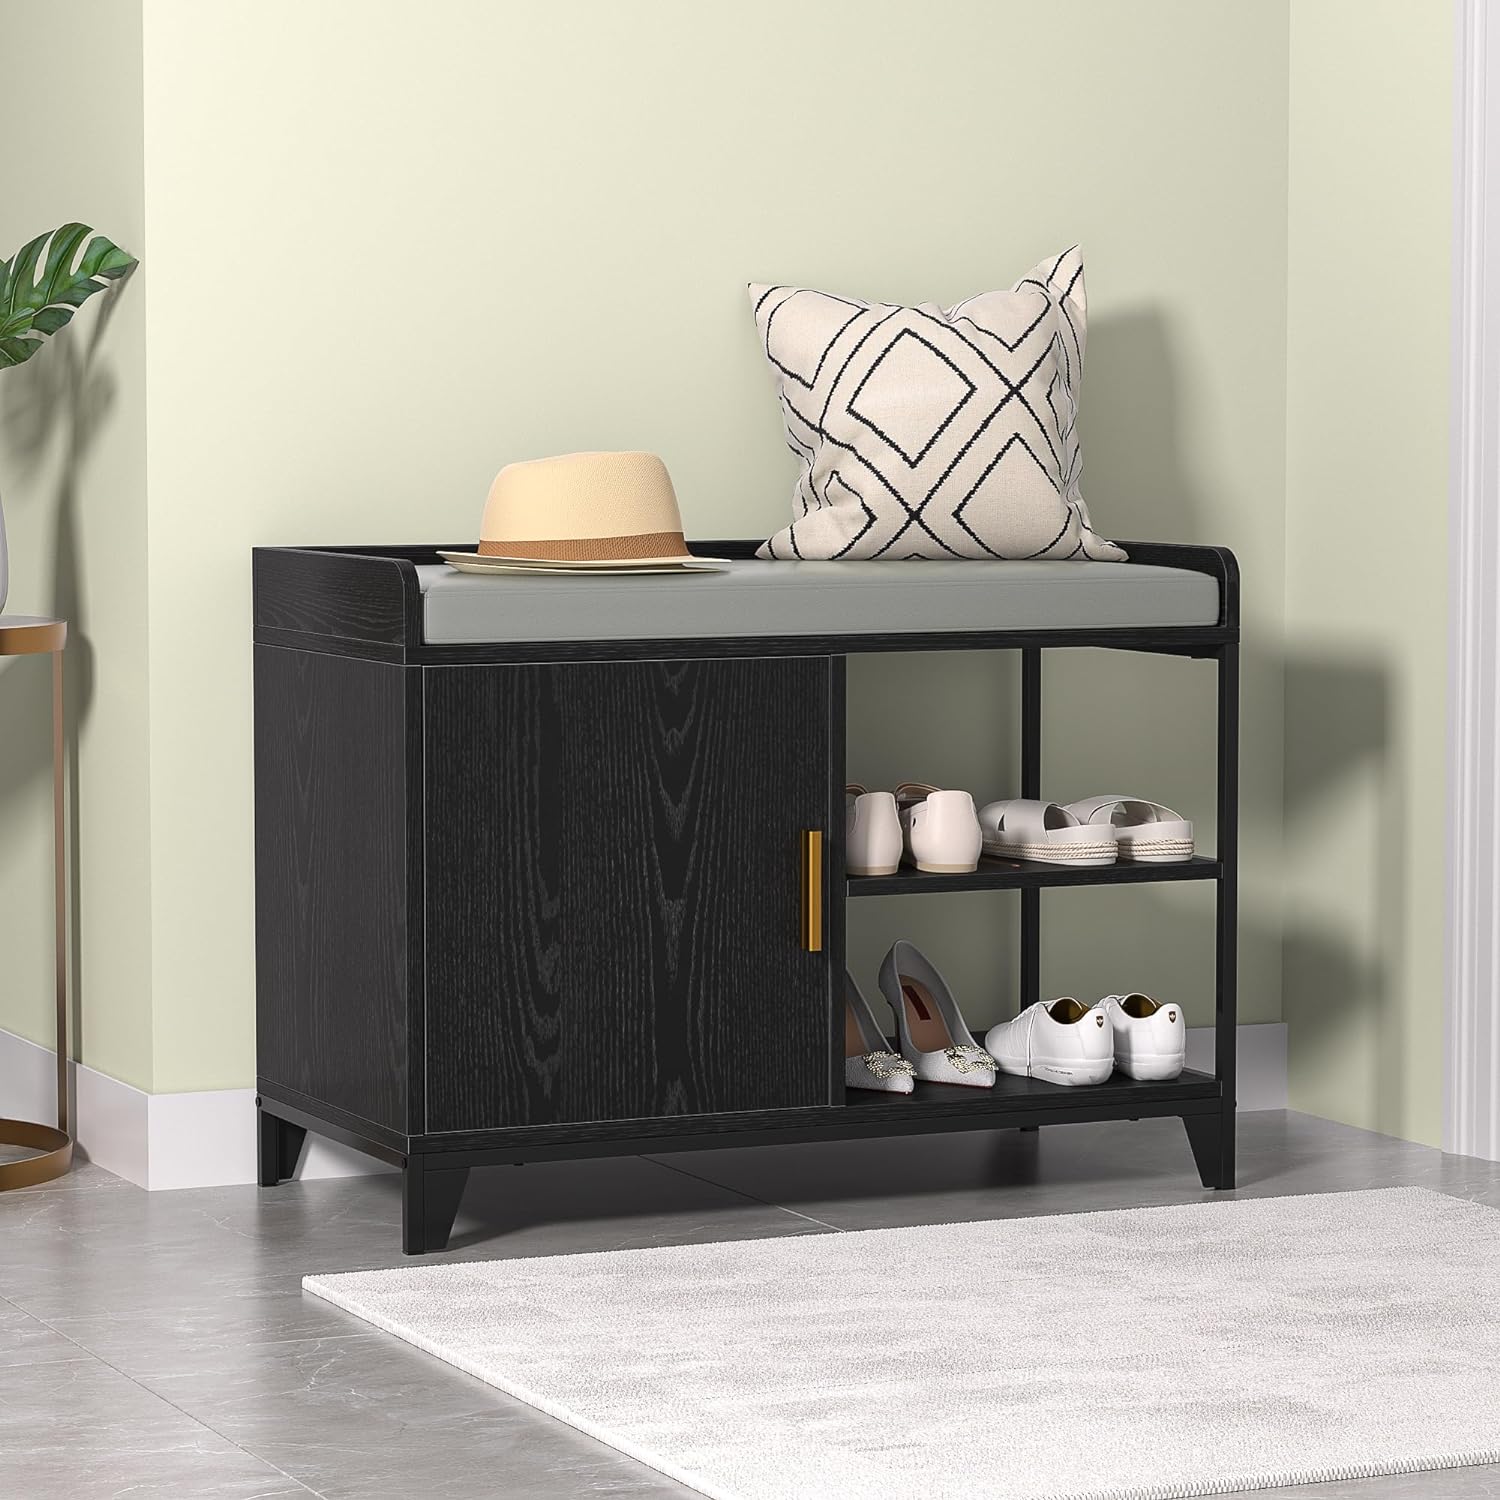 VECELO Shoe Storage Bench Entryway Cabinet with Removable Seat Cushion